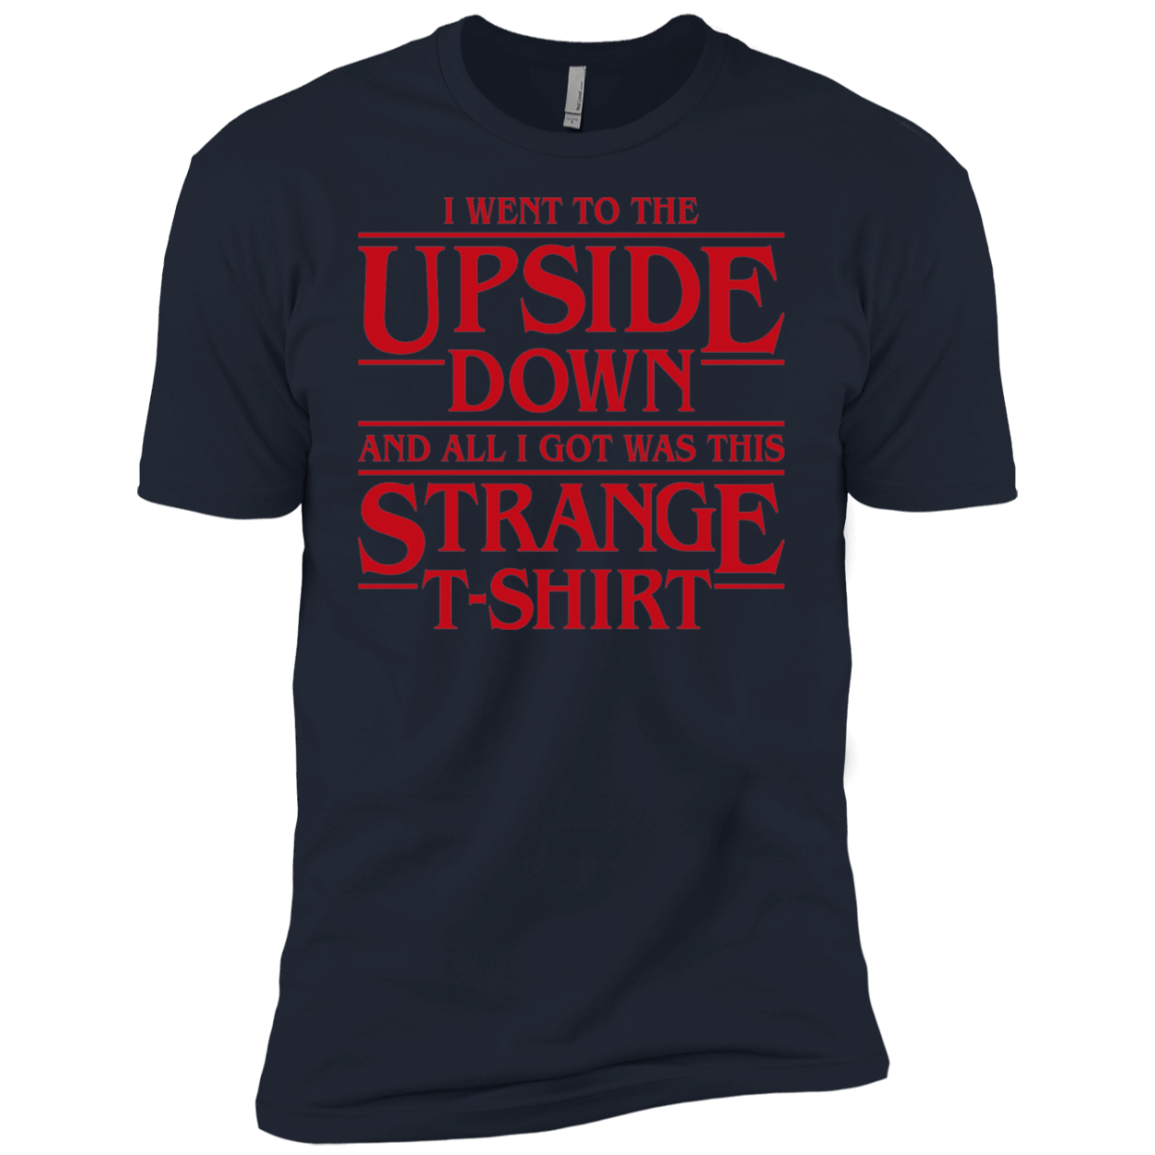 T-Shirts Midnight Navy / X-Small I Went to the Upside Down Men's Premium T-Shirt